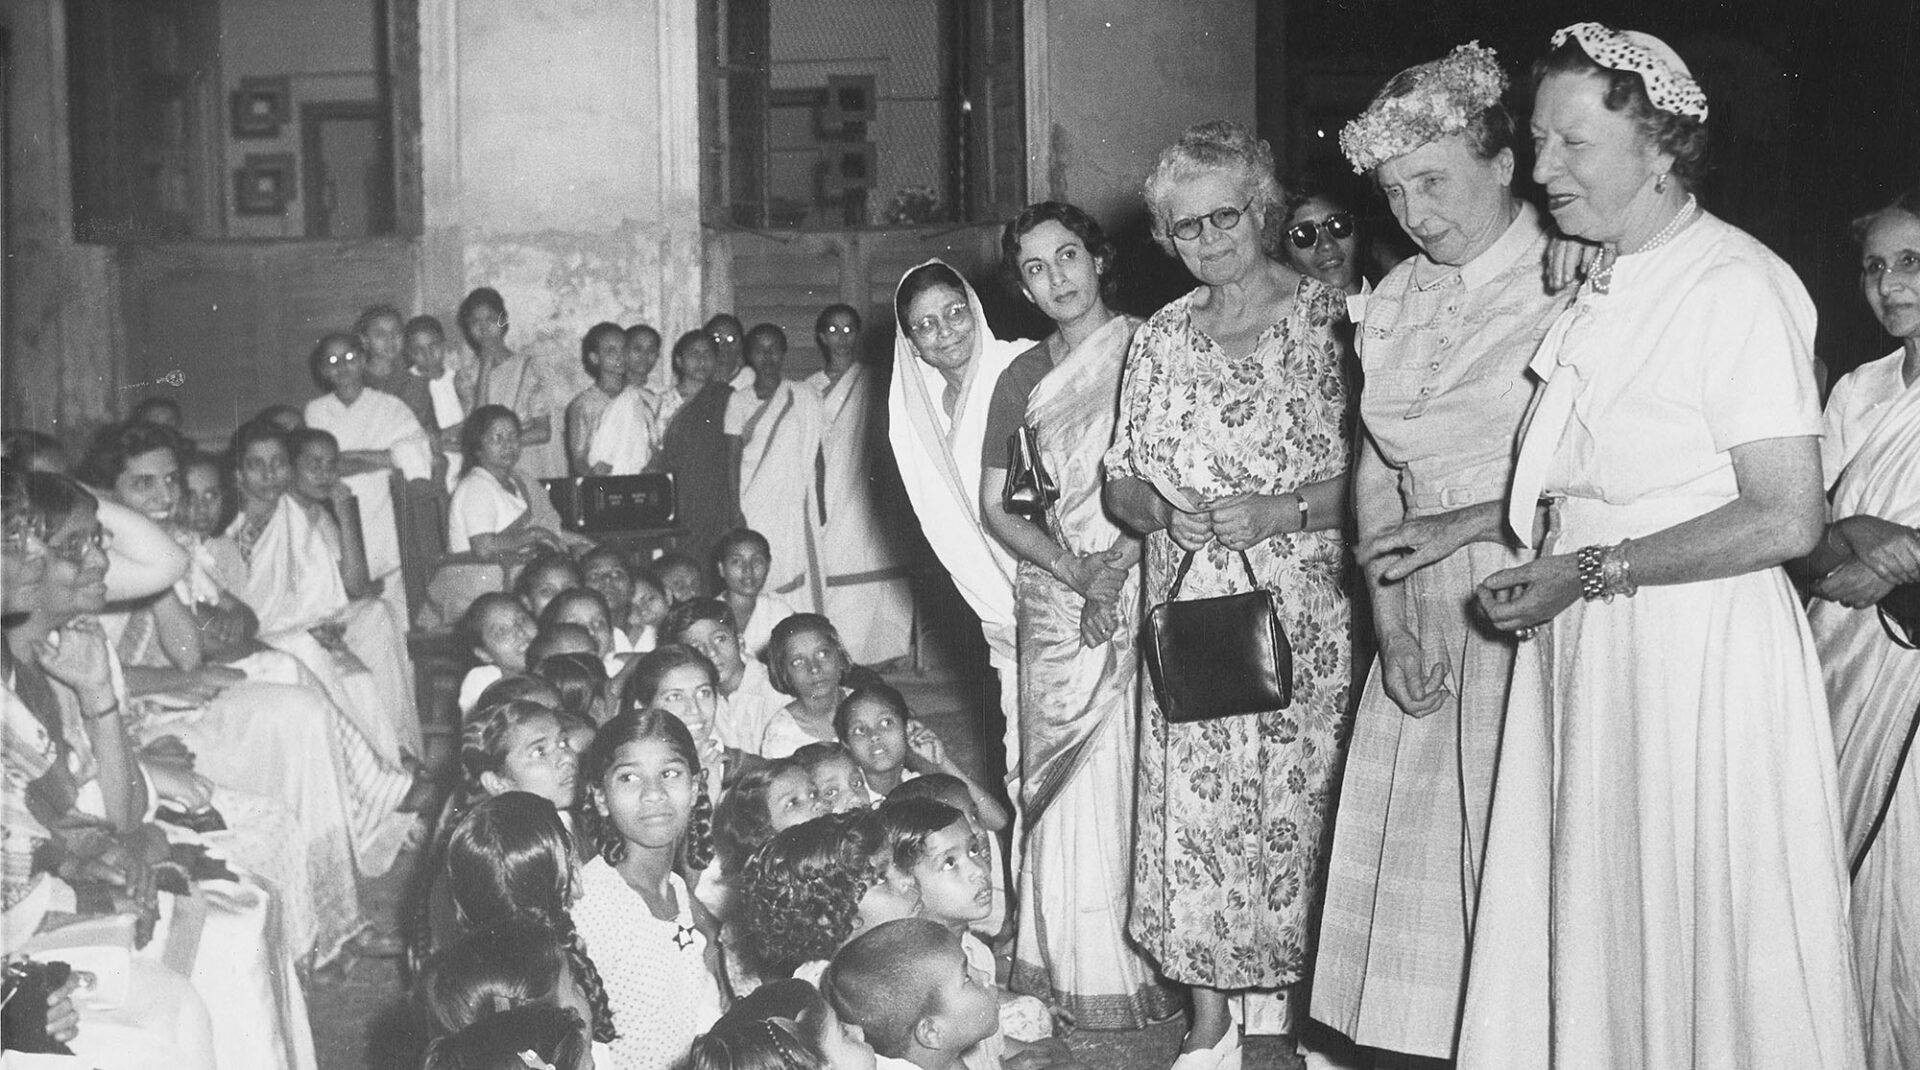 Helen Keller visits the All Bengal Women's Union Home in Calcutta, India. 